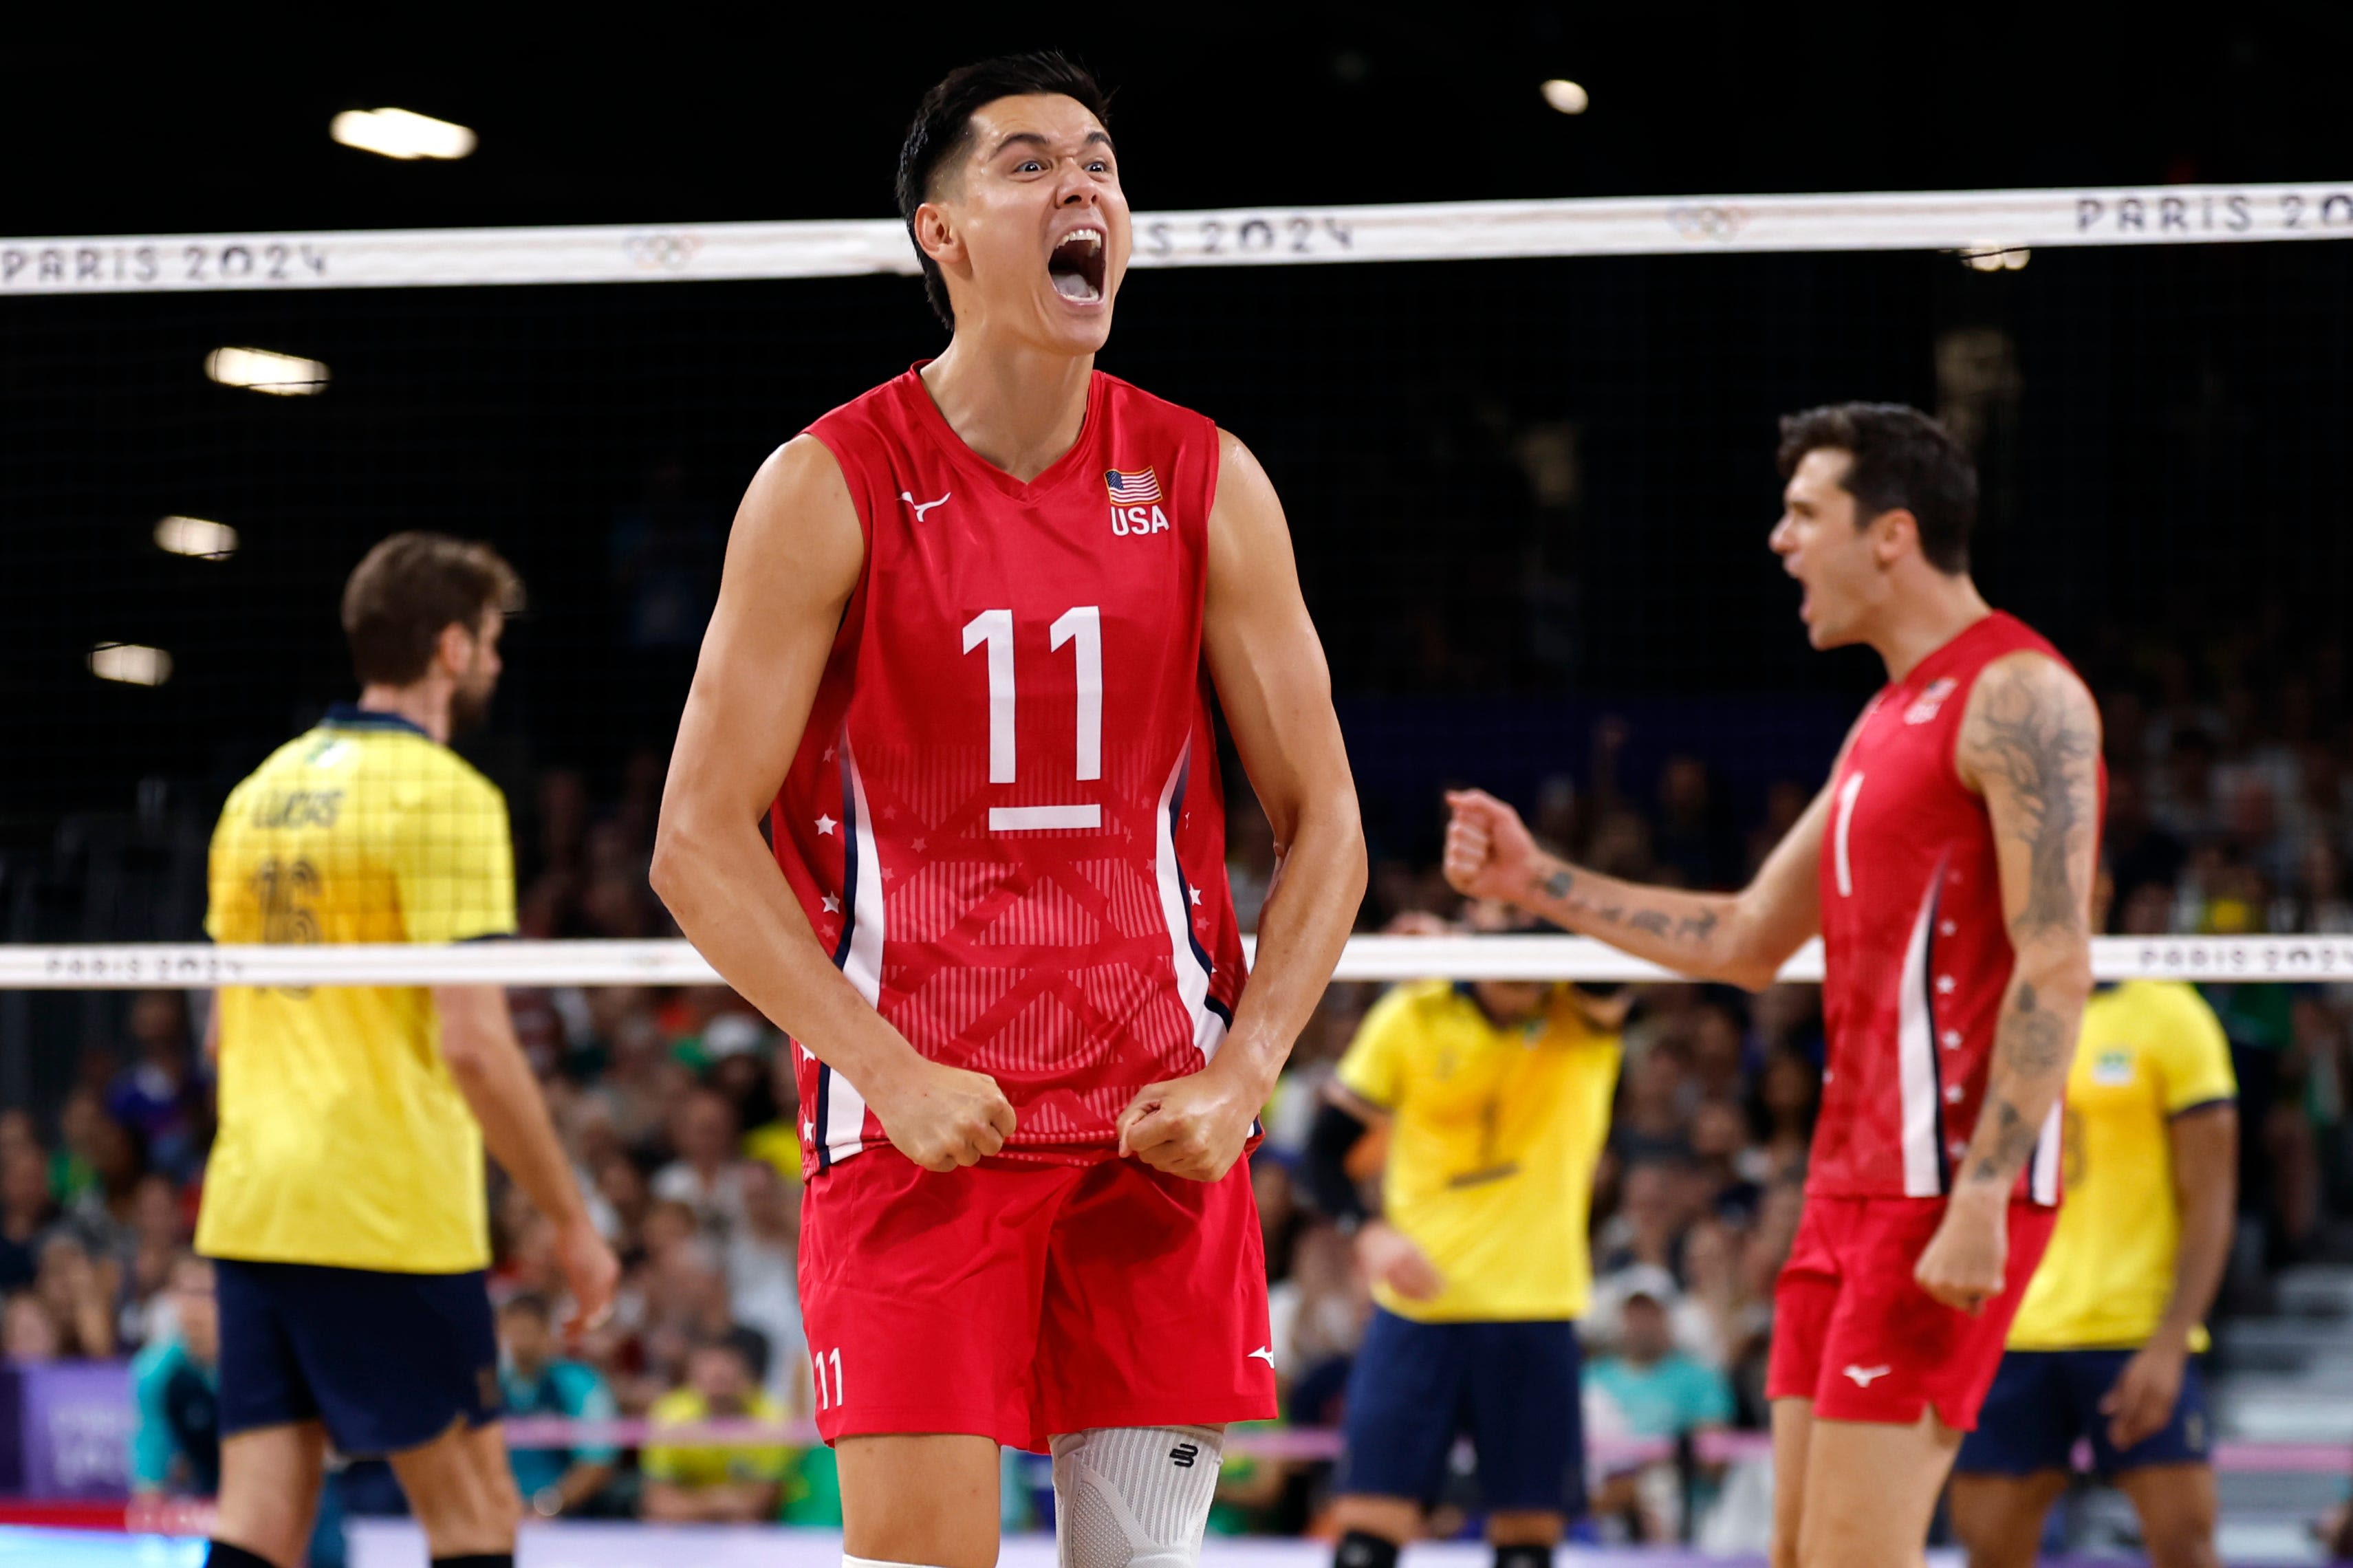 These US men's volleyball graybeards haven't lost yet at the Paris Olympics